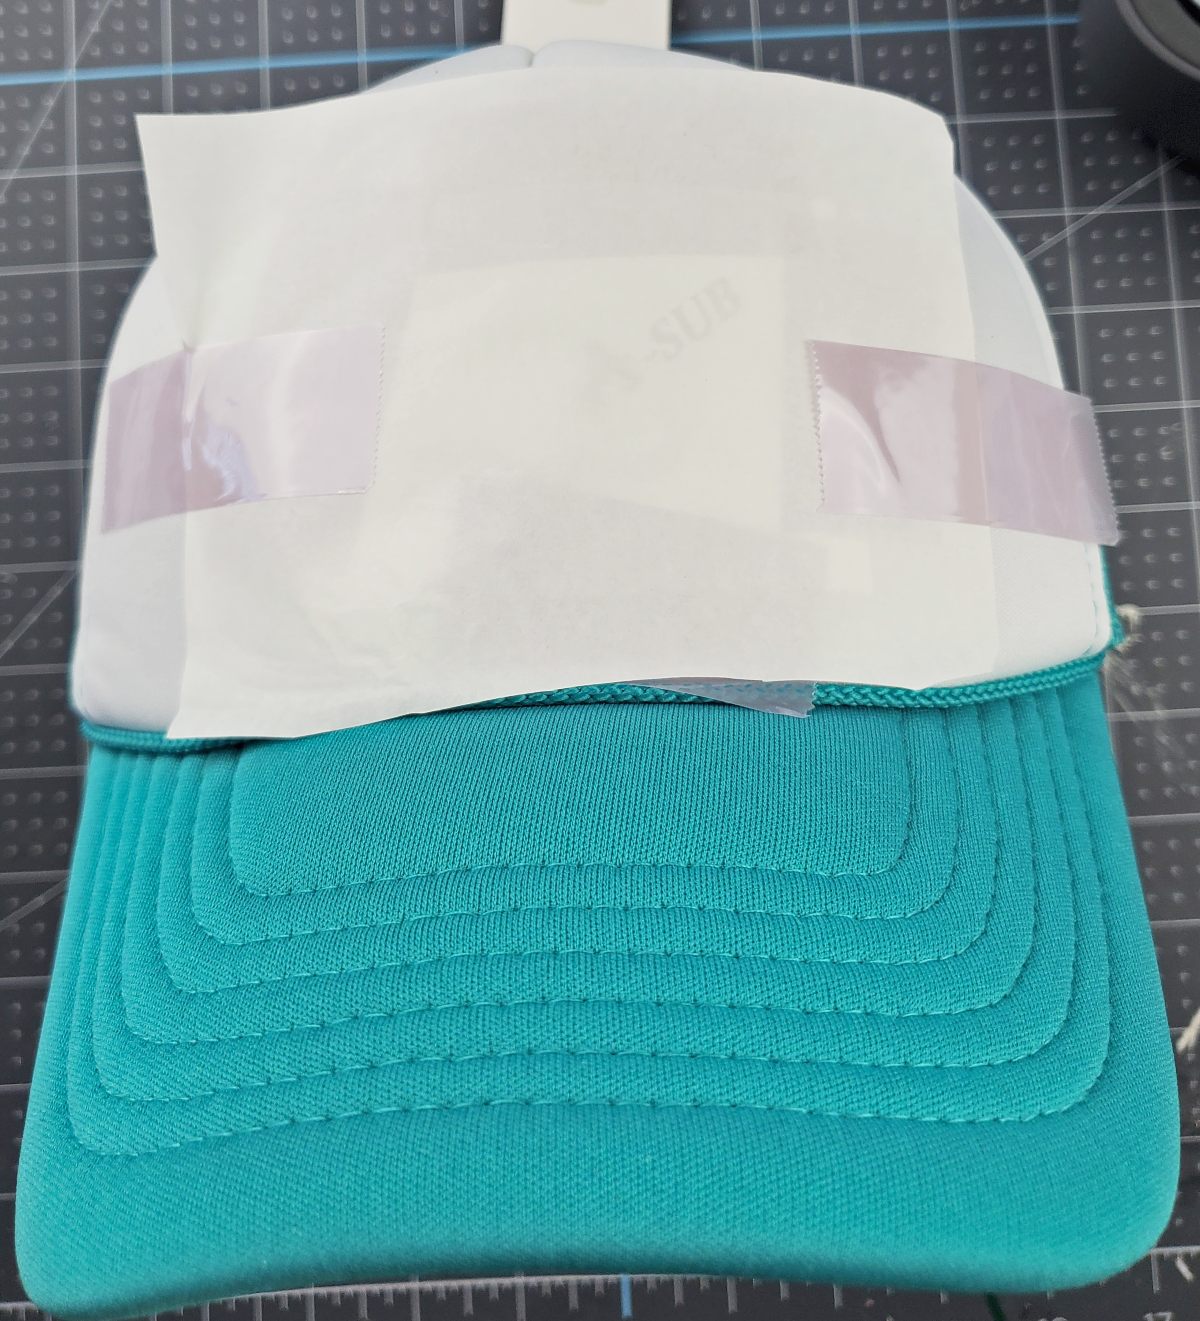 sublimation on hats instructions